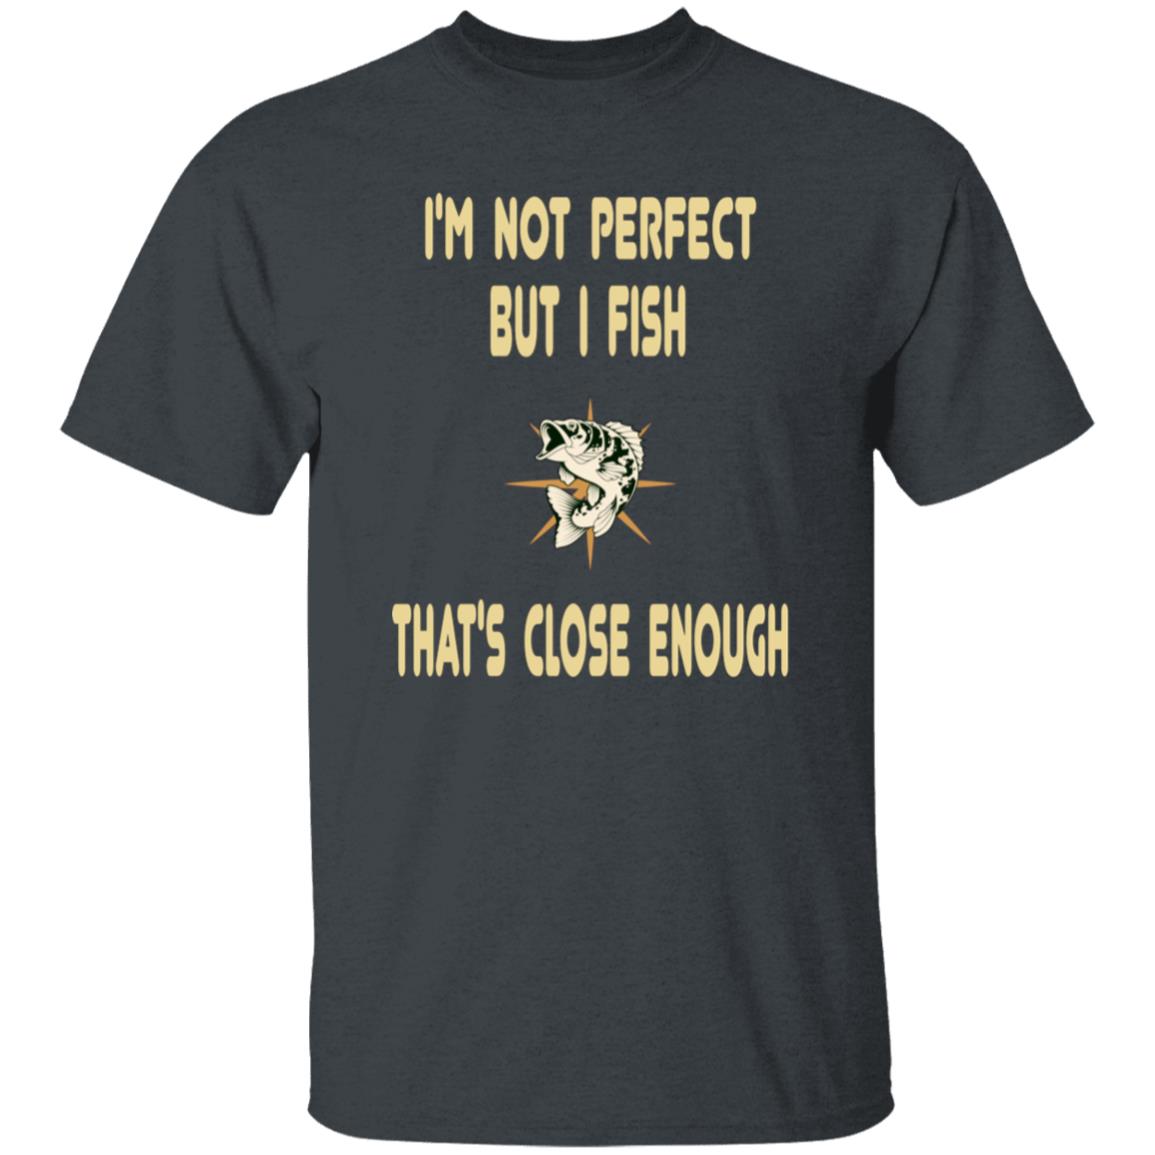 I'm not perfect but I fish that's close enough t-shirt dark-heather